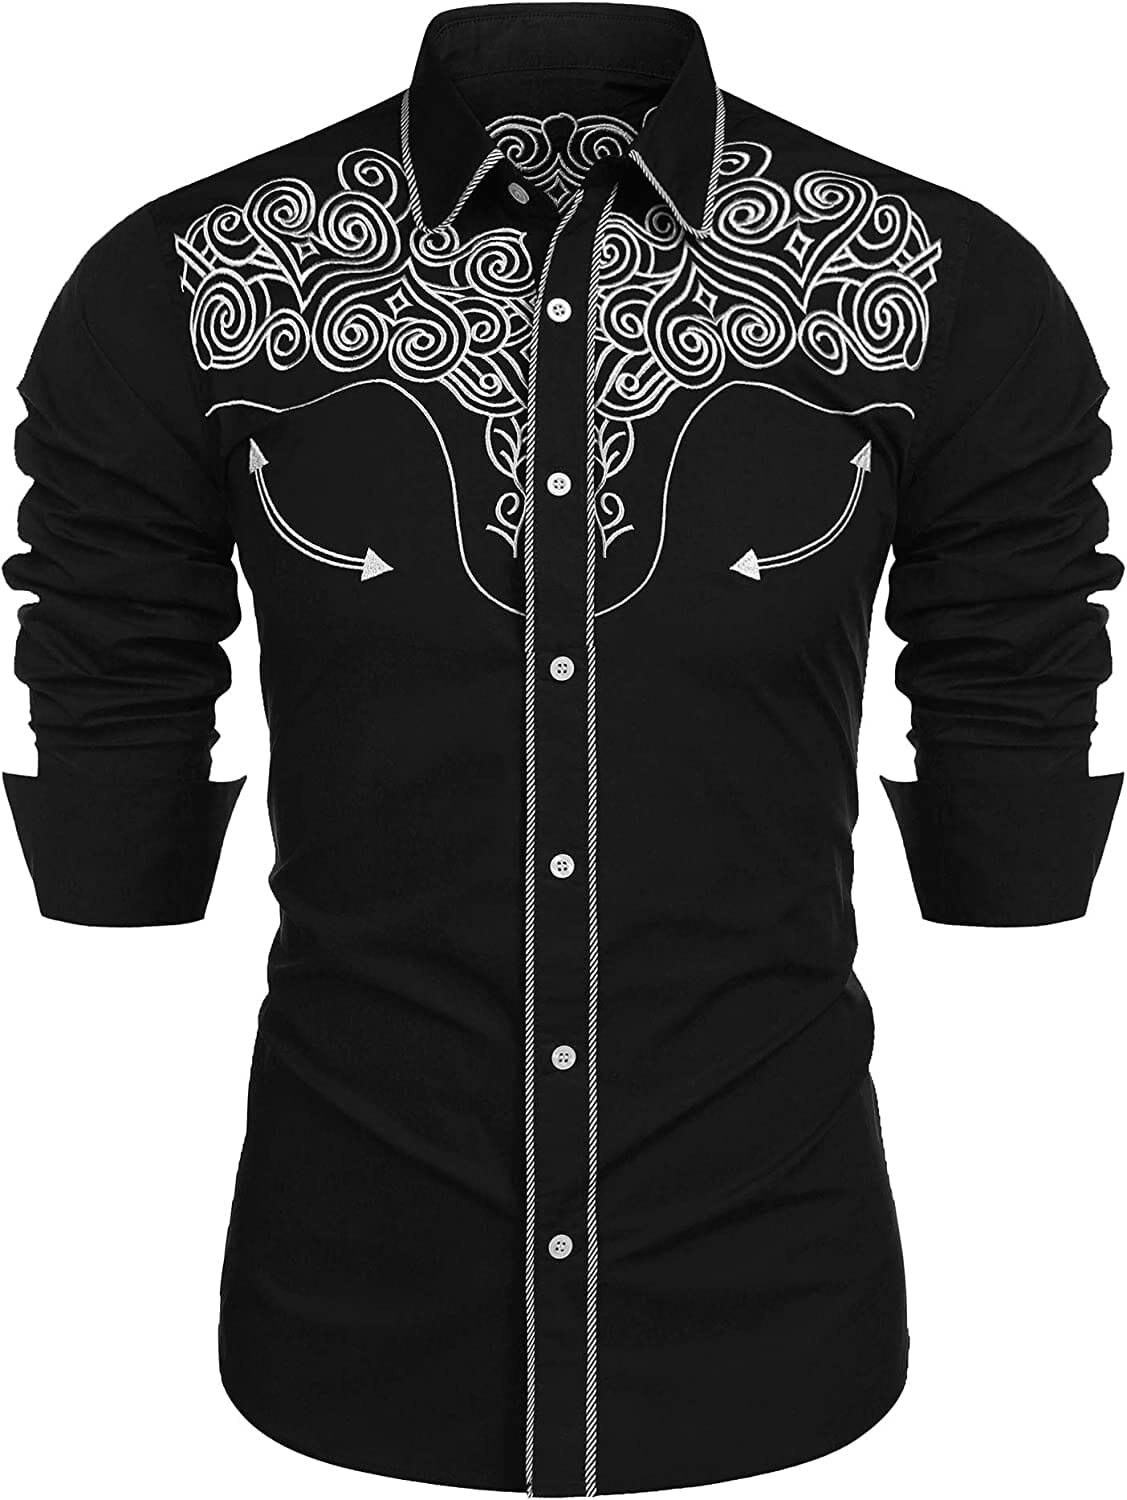 Embroidered Cowboy Button Down Shirt (US Only) Shirts COOFANDY Store Classic Black S 